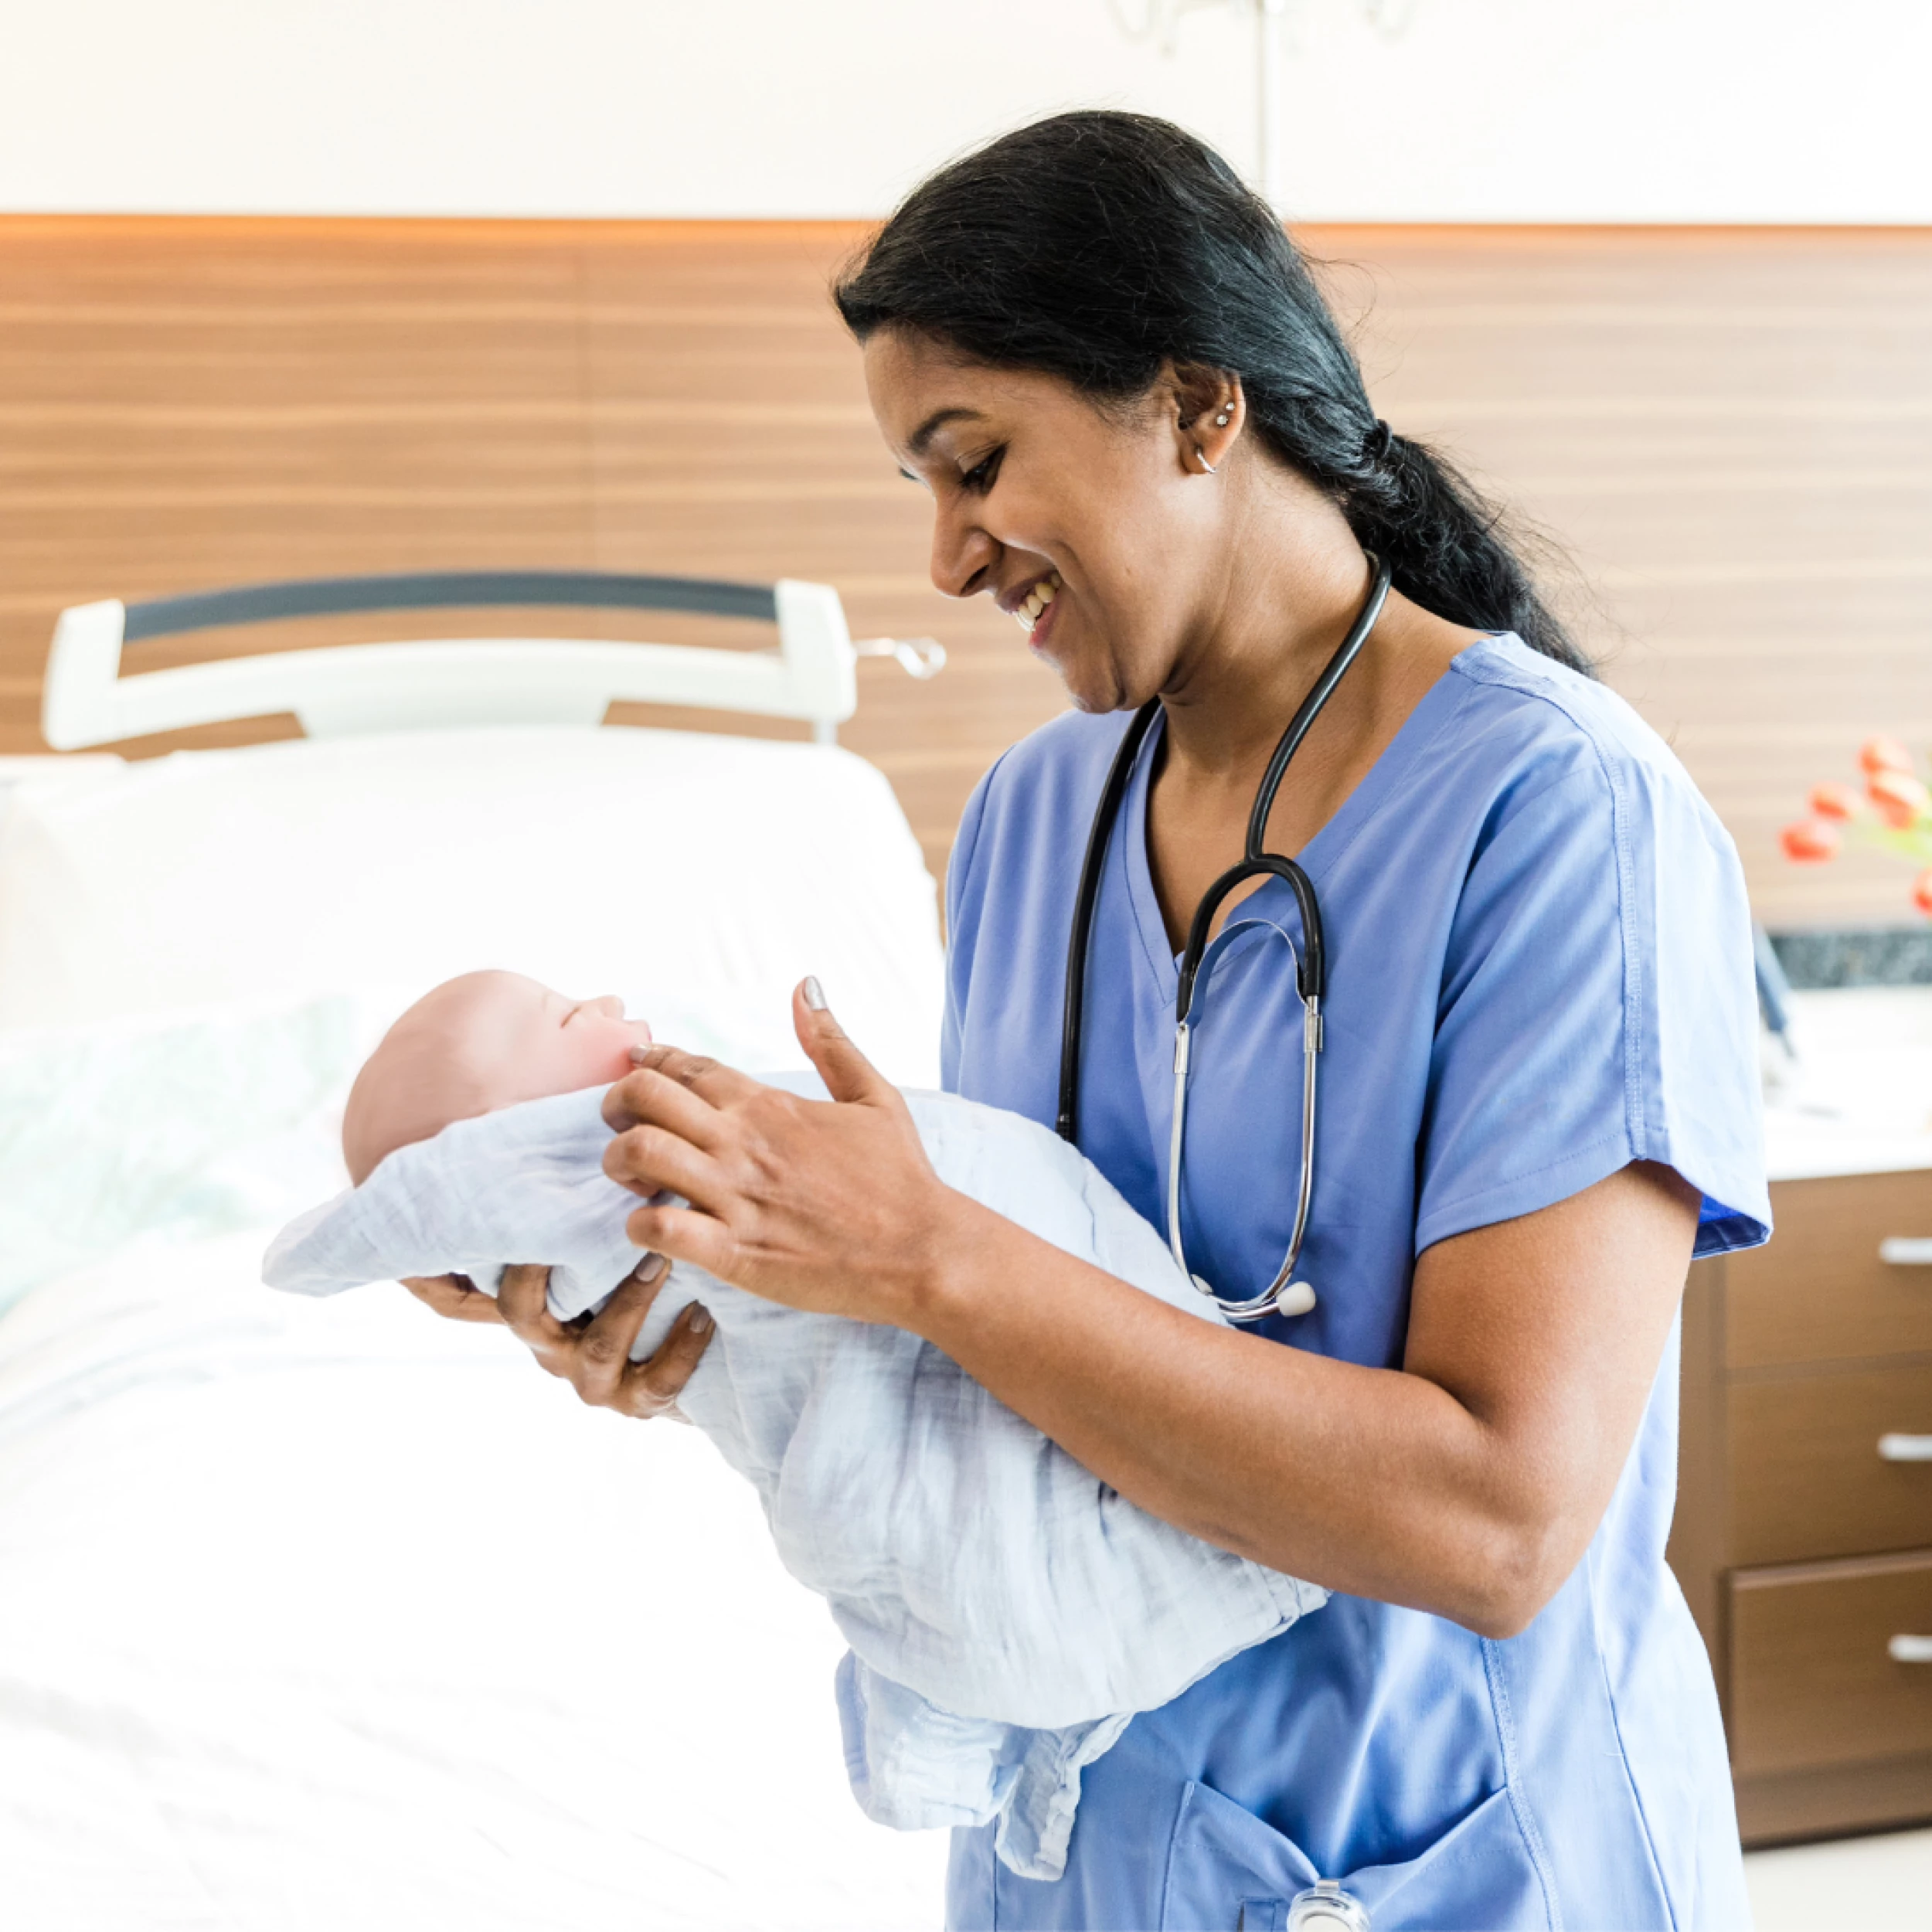 Midwife with newborn baby (stock image)